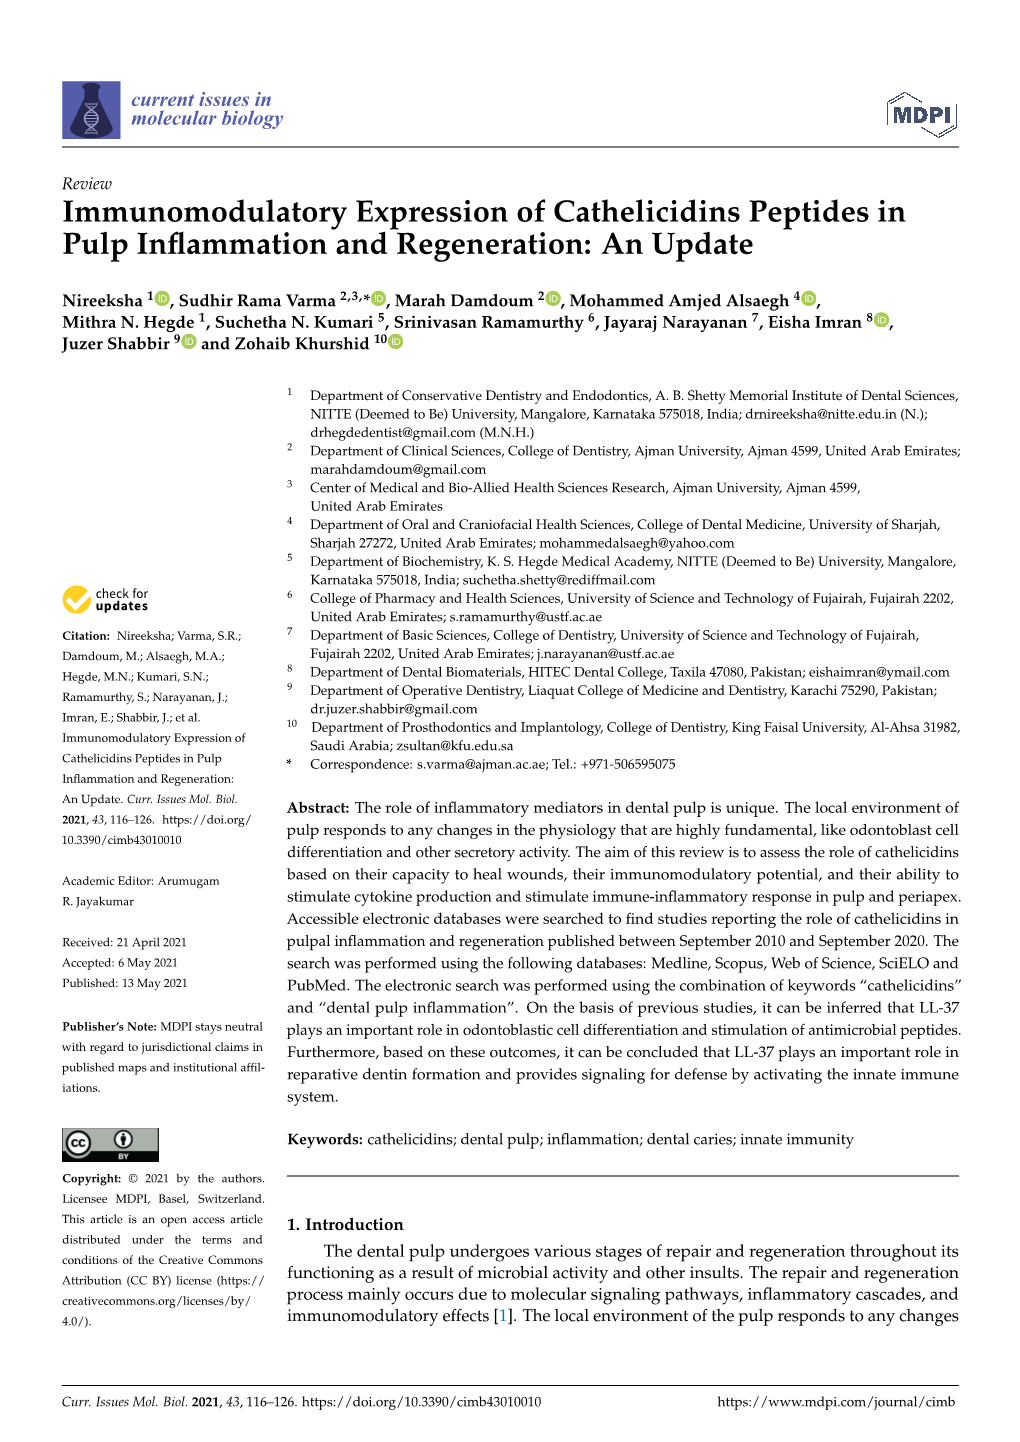 Immunomodulatory Expression of Cathelicidins Peptides in Pulp Inﬂammation and Regeneration: an Update